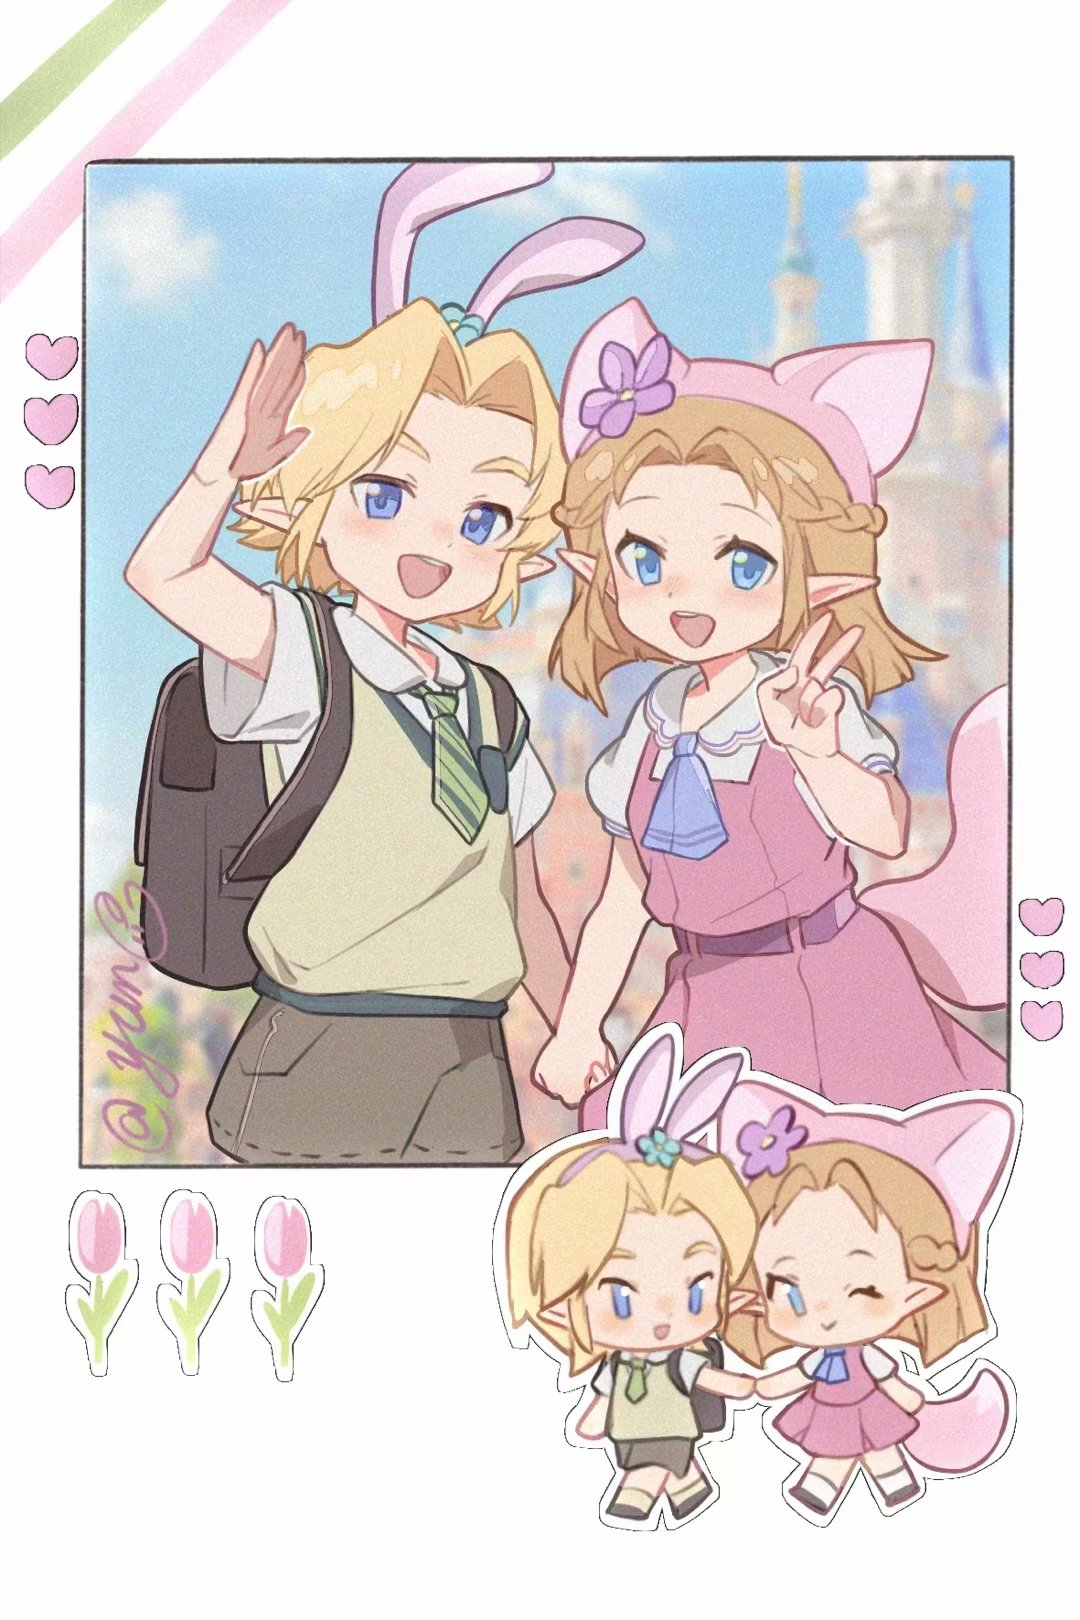 1boy 1girl animal_ears backpack bag blonde_hair blue_eyes braid brown_hair brown_shorts castle chibi commentary contemporary crown_braid dress fake_animal_ears fake_tail flower fox_ears fox_tail green_sweater_vest hairband heart highres holding_hands link pink_dress pink_hairband pointy_ears princess_zelda rabbit_ears randoseru school_uniform shorts signature sweater_vest tail the_legend_of_zelda the_legend_of_zelda:_ocarina_of_time tulip v waving young_link young_zelda yun_(dl2n5c7kbh8ihcx)